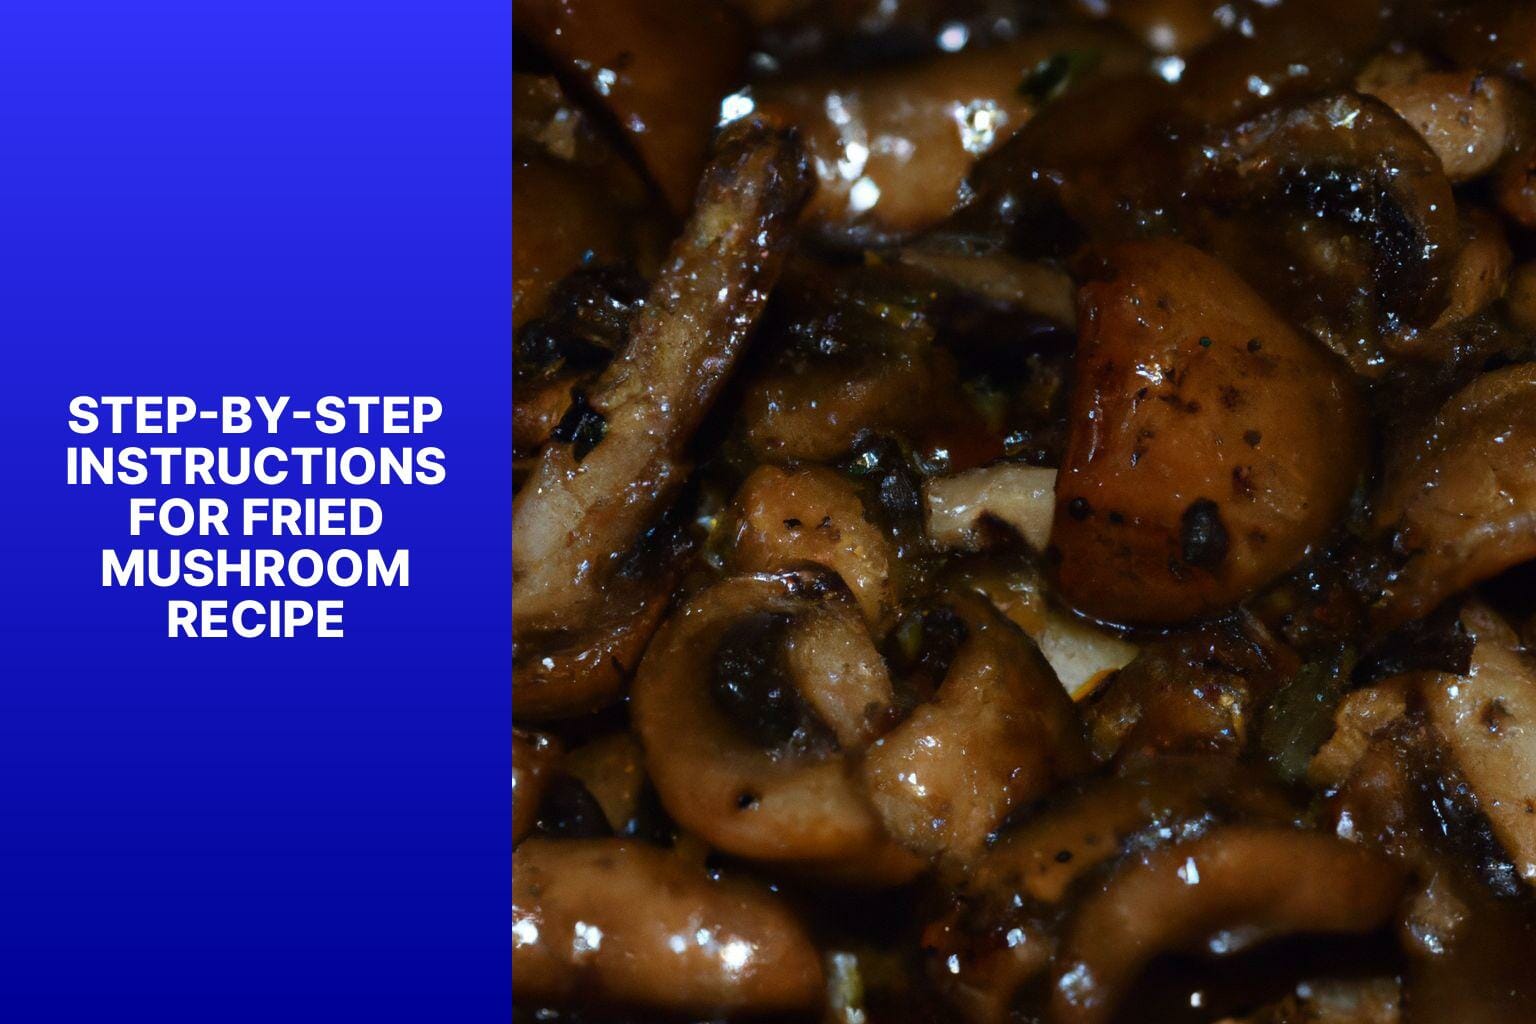 Step-by-Step Instructions for Fried Mushroom Recipe - fried mushroom recipe 